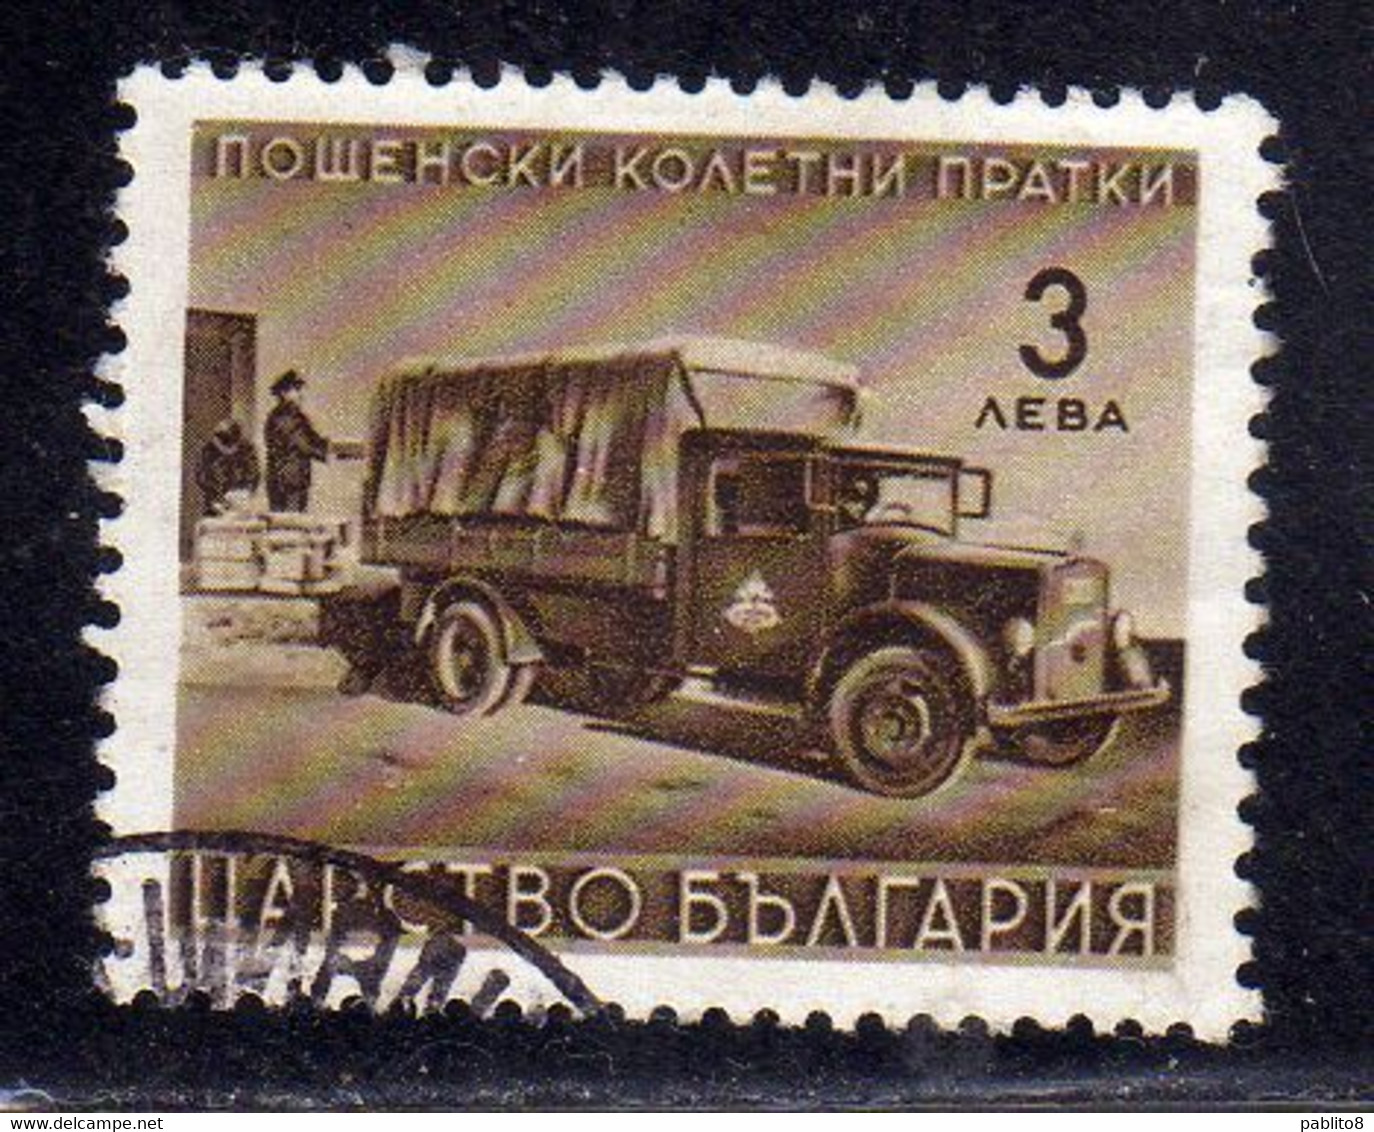 BULGARIA BULGARIE BULGARIEN 1941 PARCEL POST STAMPS PACCHI POSTALI TRUCK 3L USATO USED OBLITERE' - Official Stamps